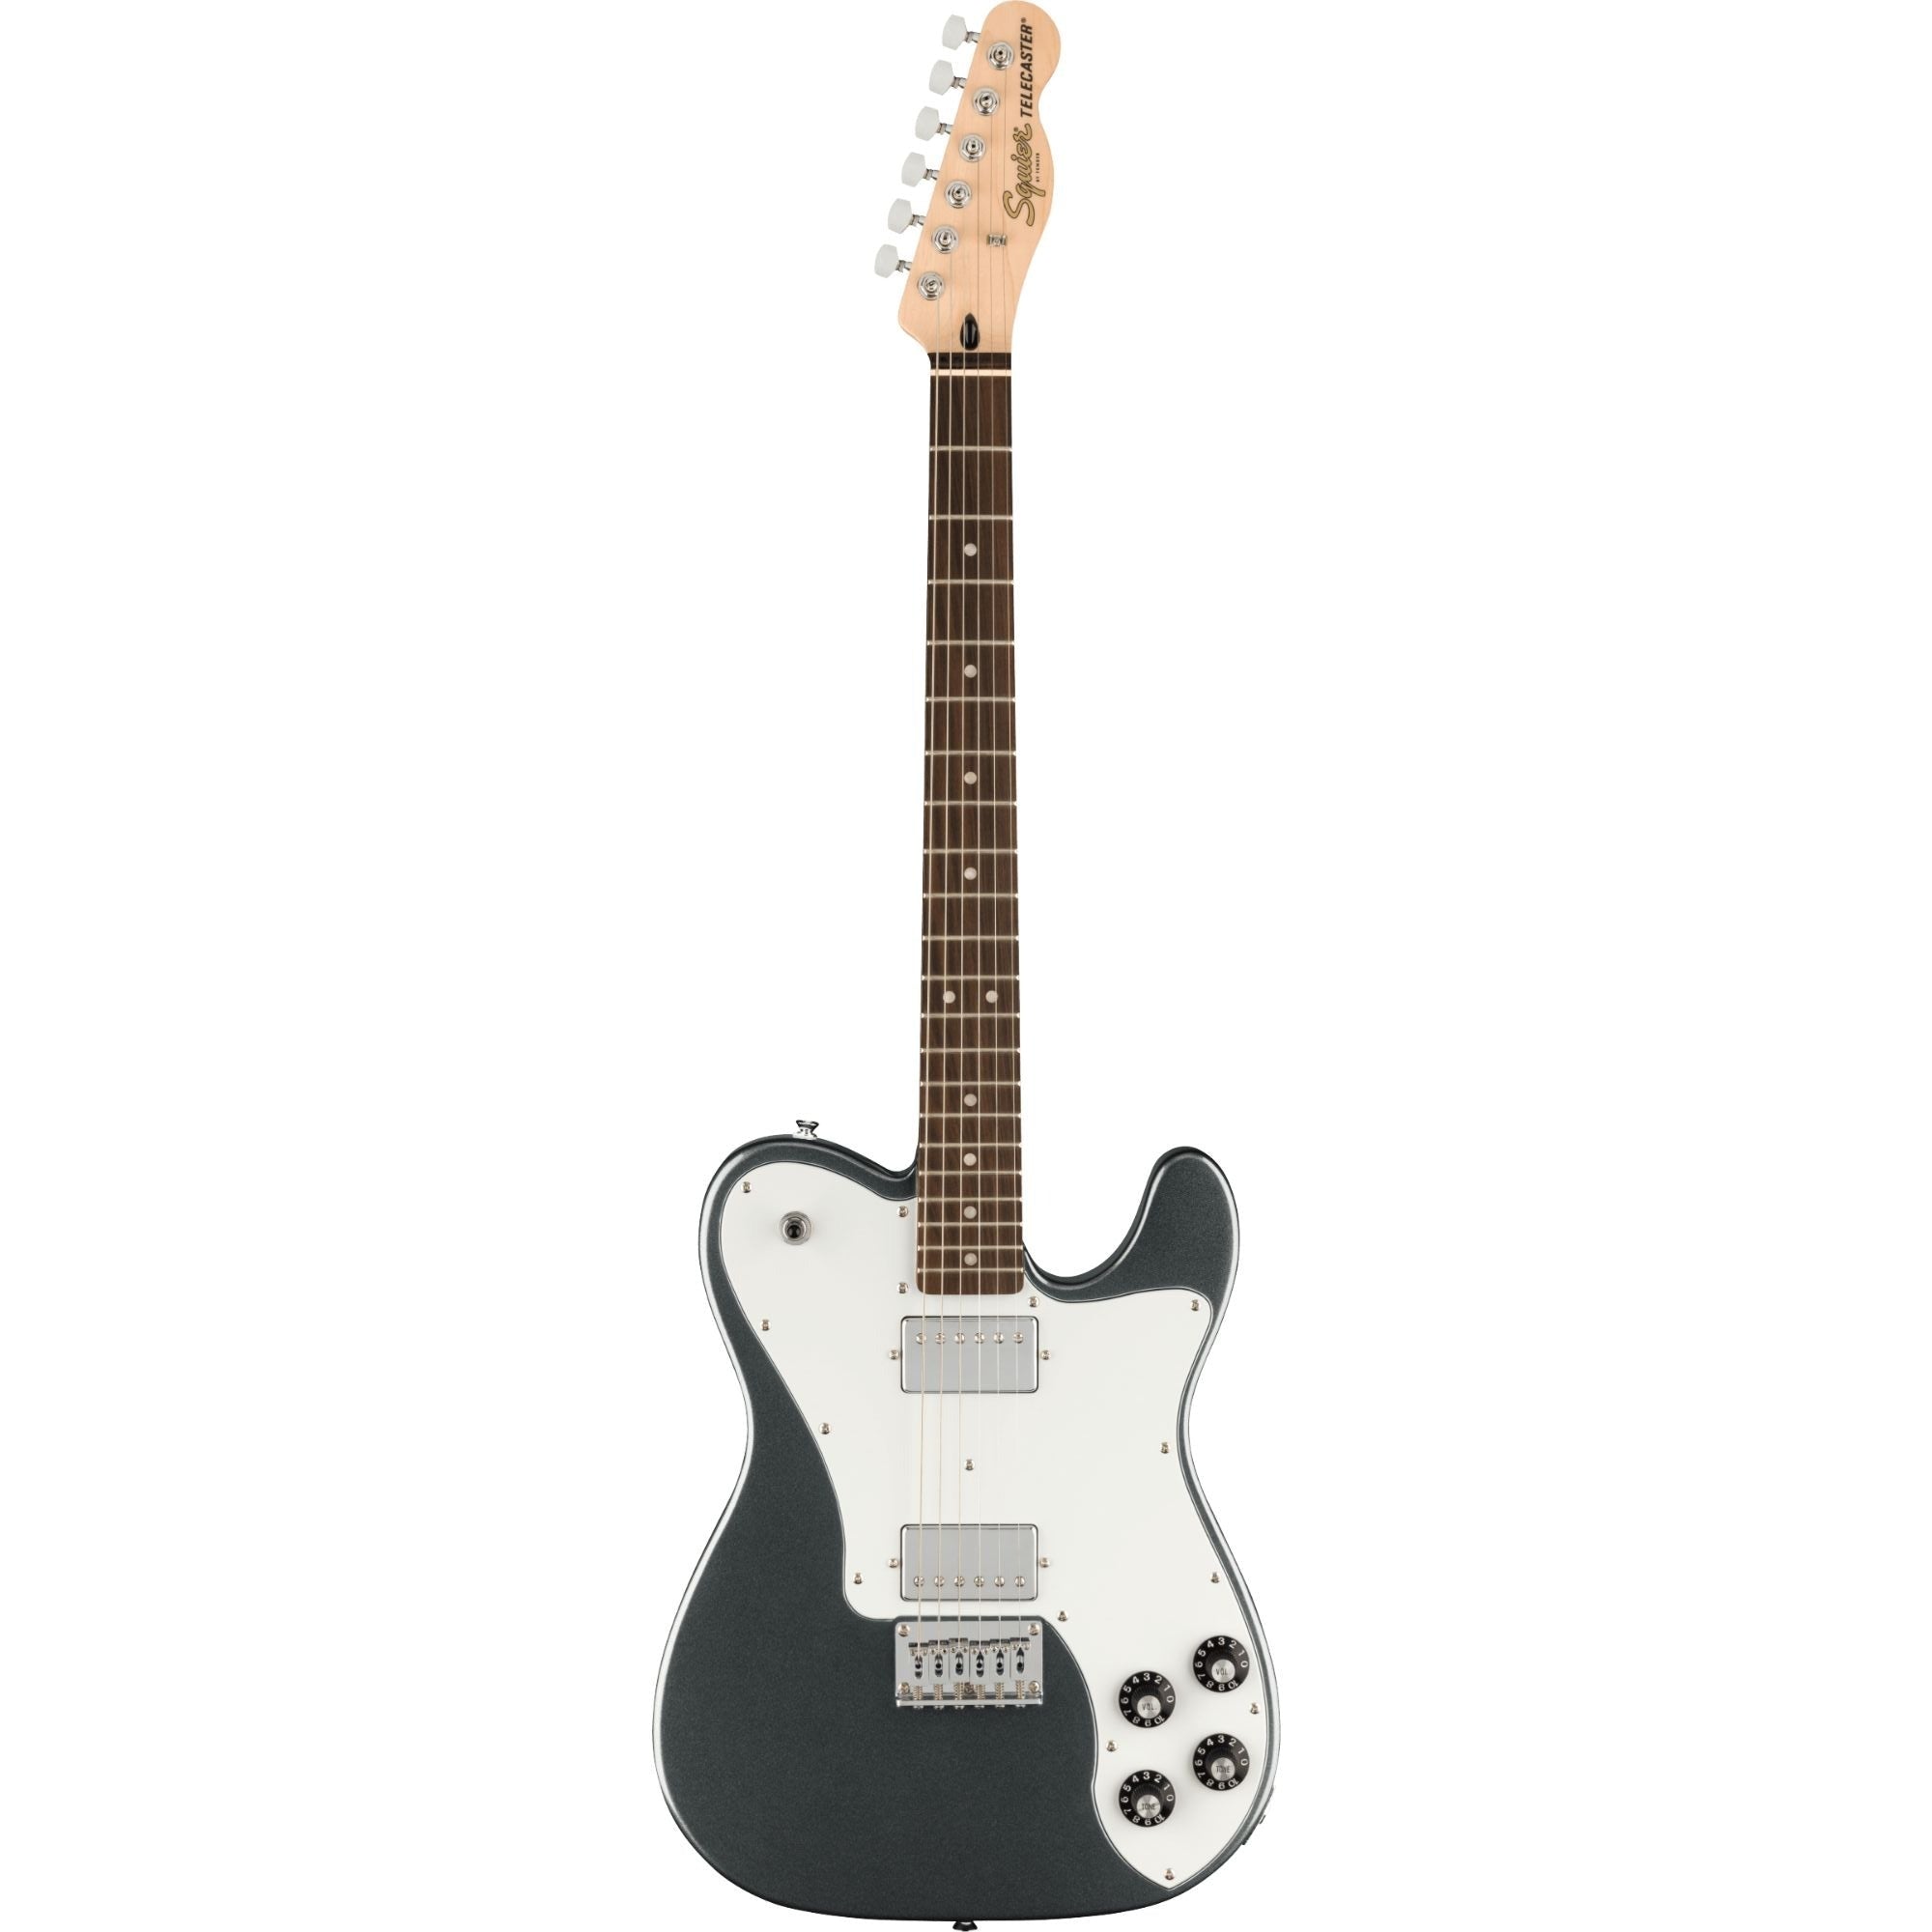 Squier Affinity Series Telecaster Deluxe, Charcoal Frost Metallic